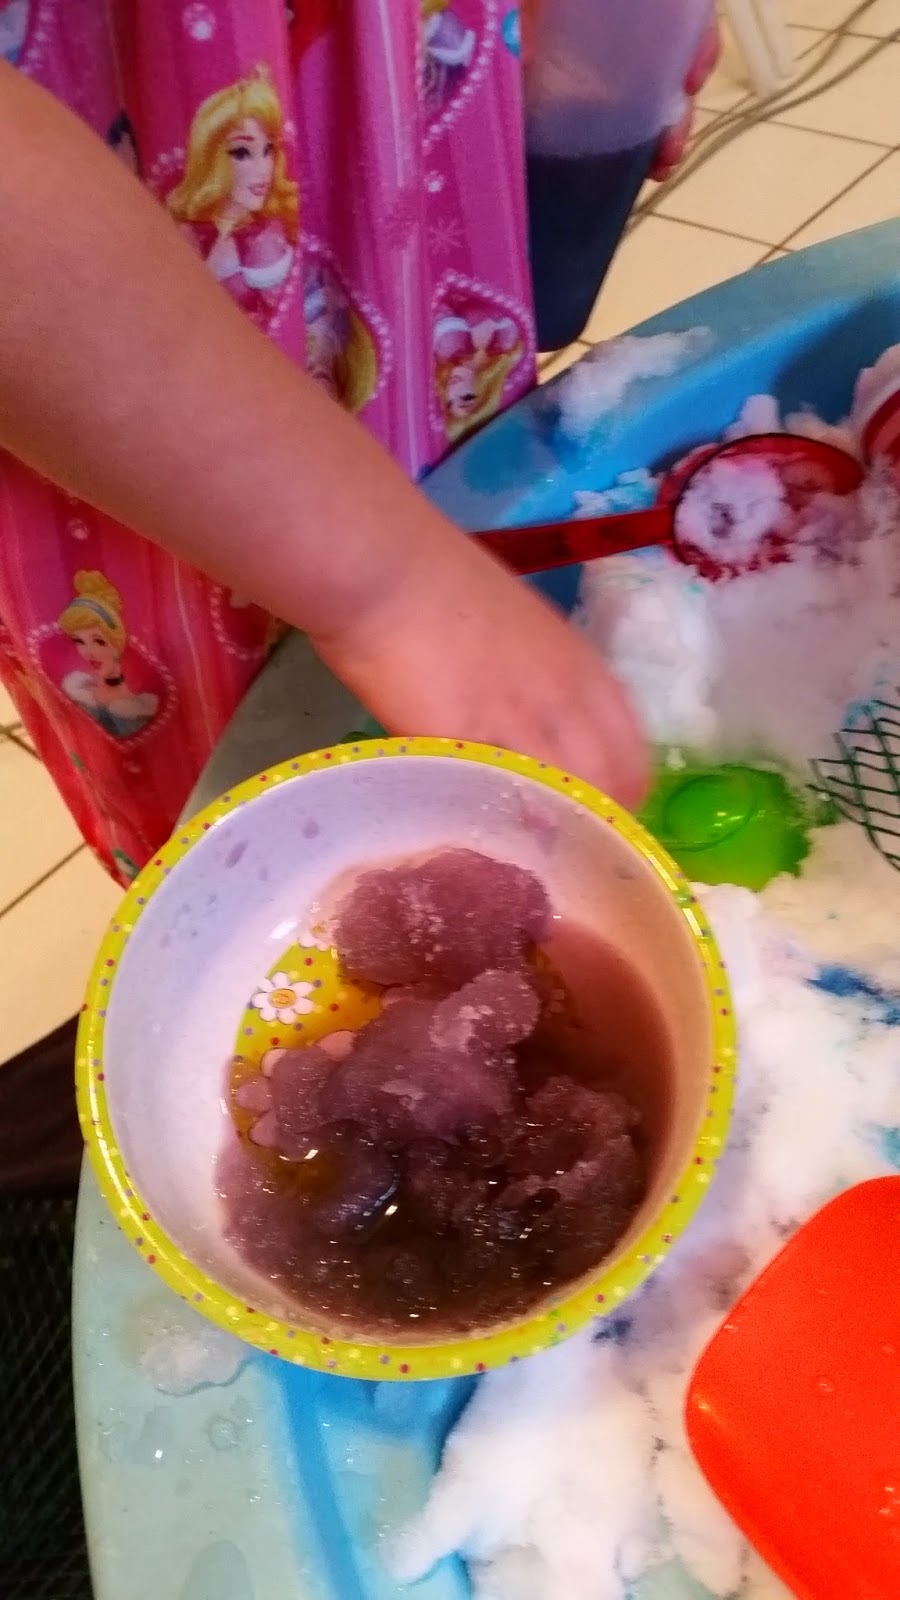 Indoor snow play - snow colored with purple water